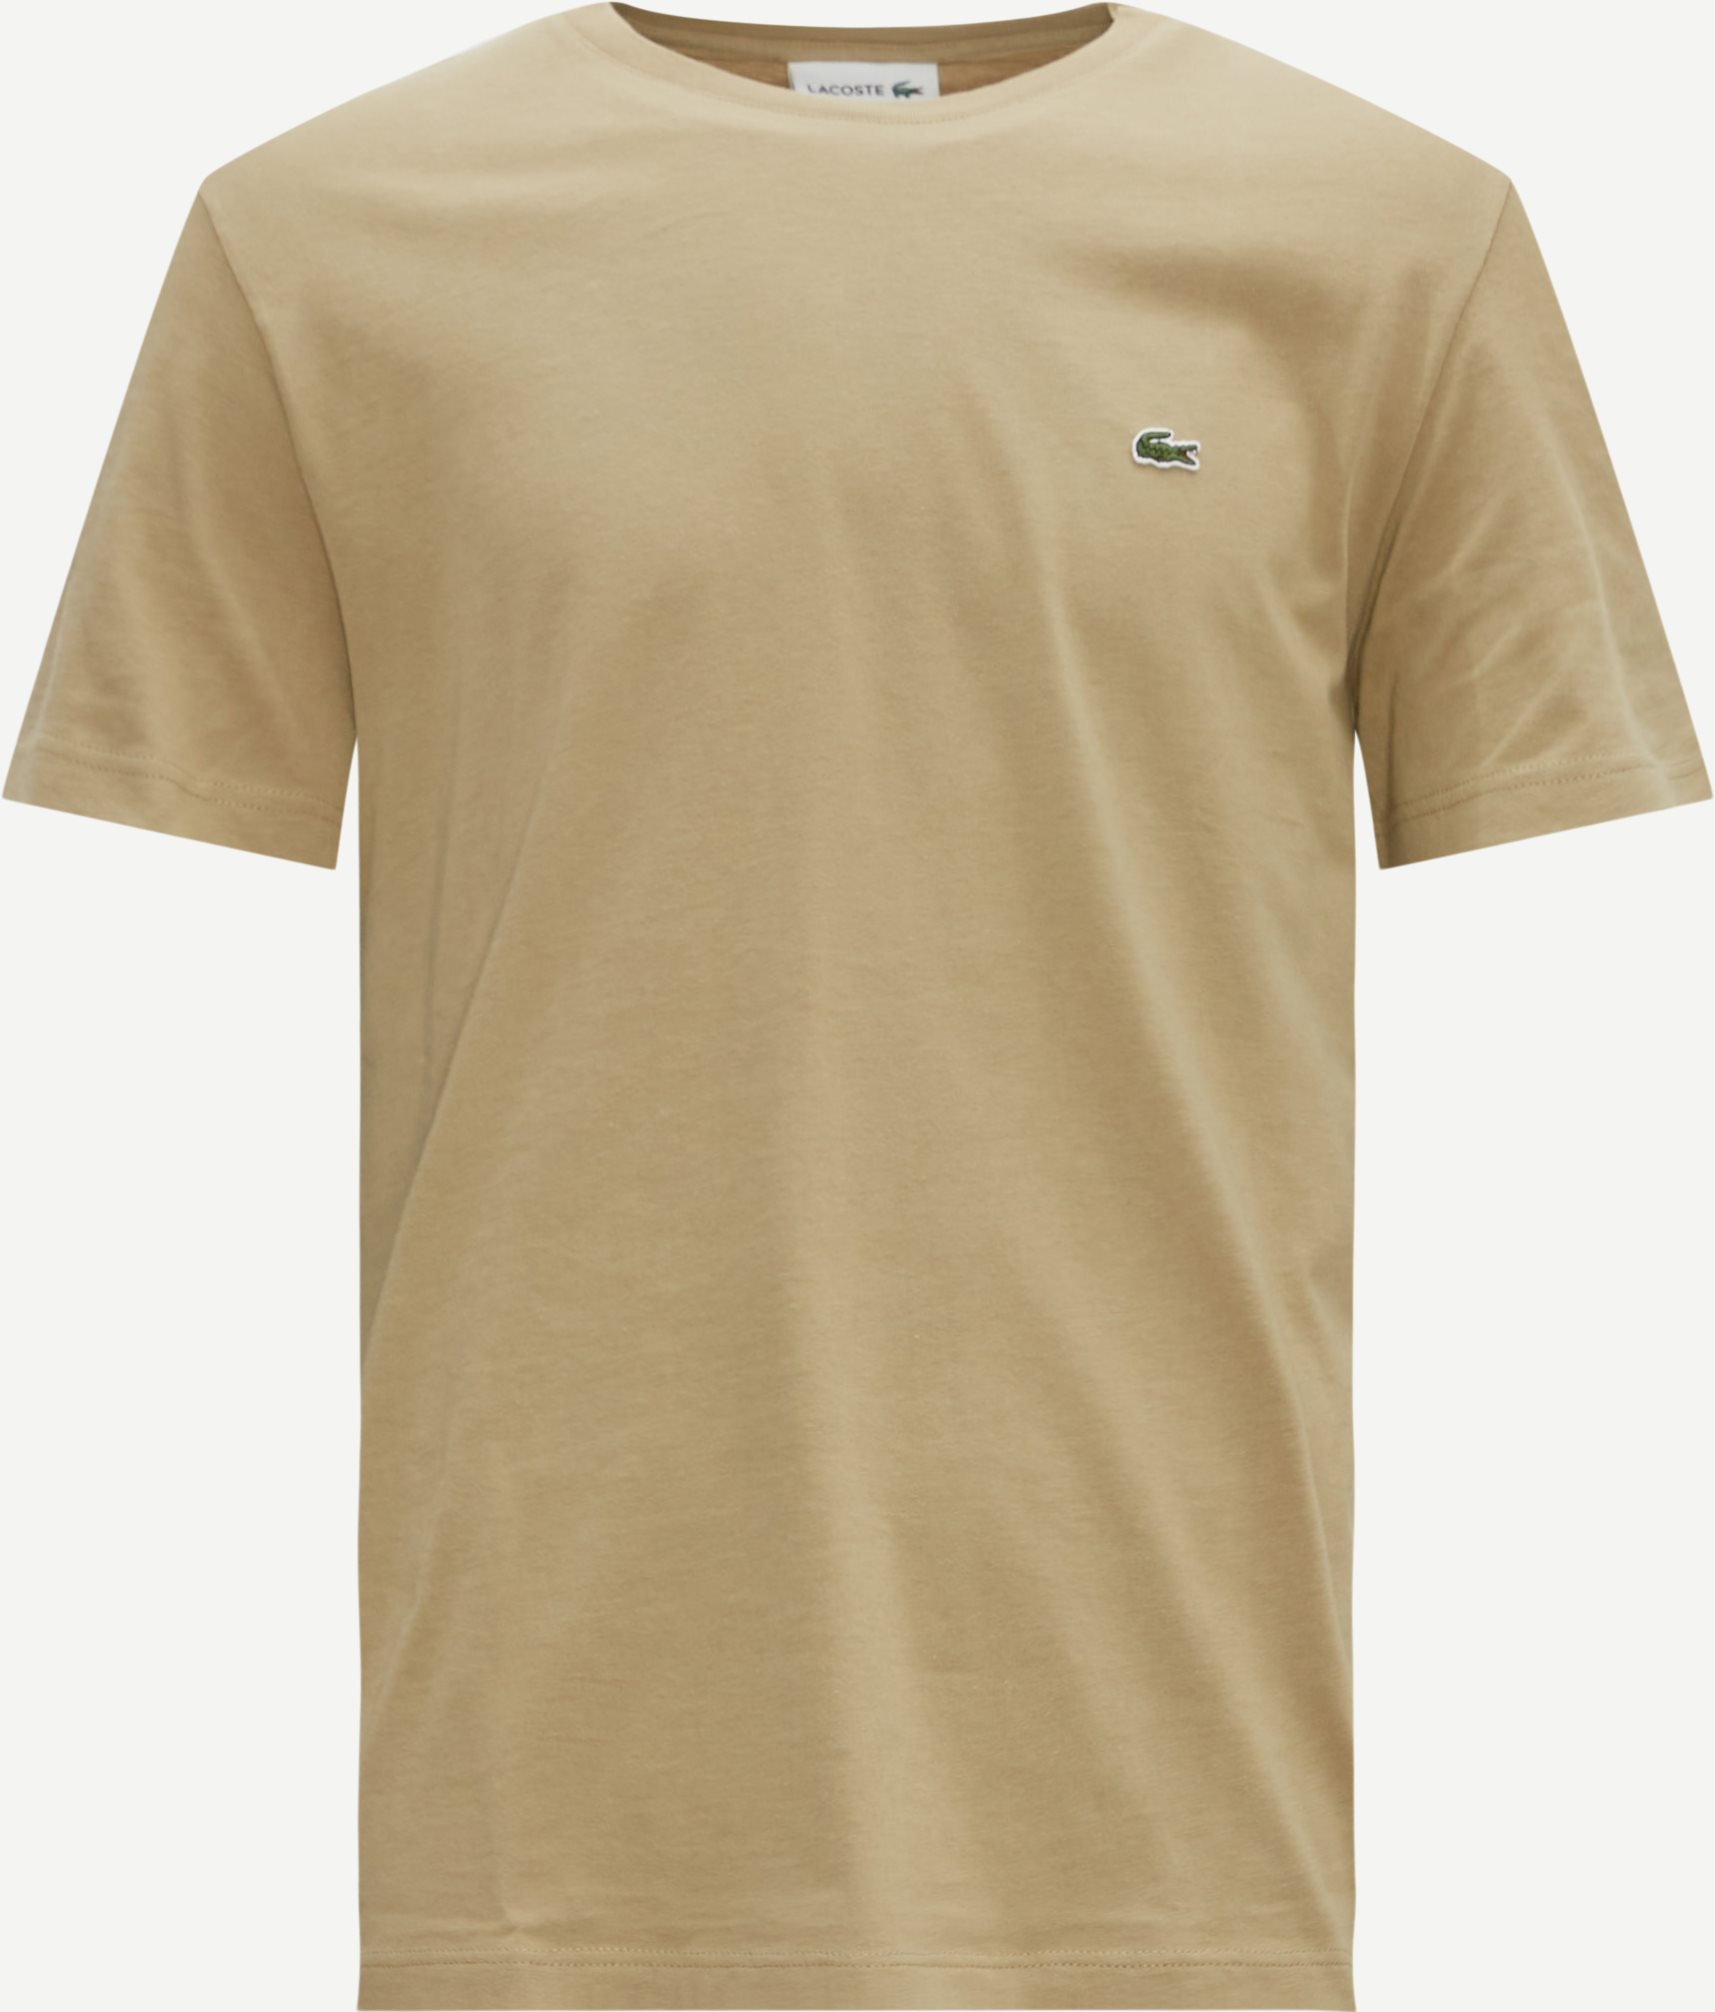 Lacoste T-shirts TH2038 SS23 Sand